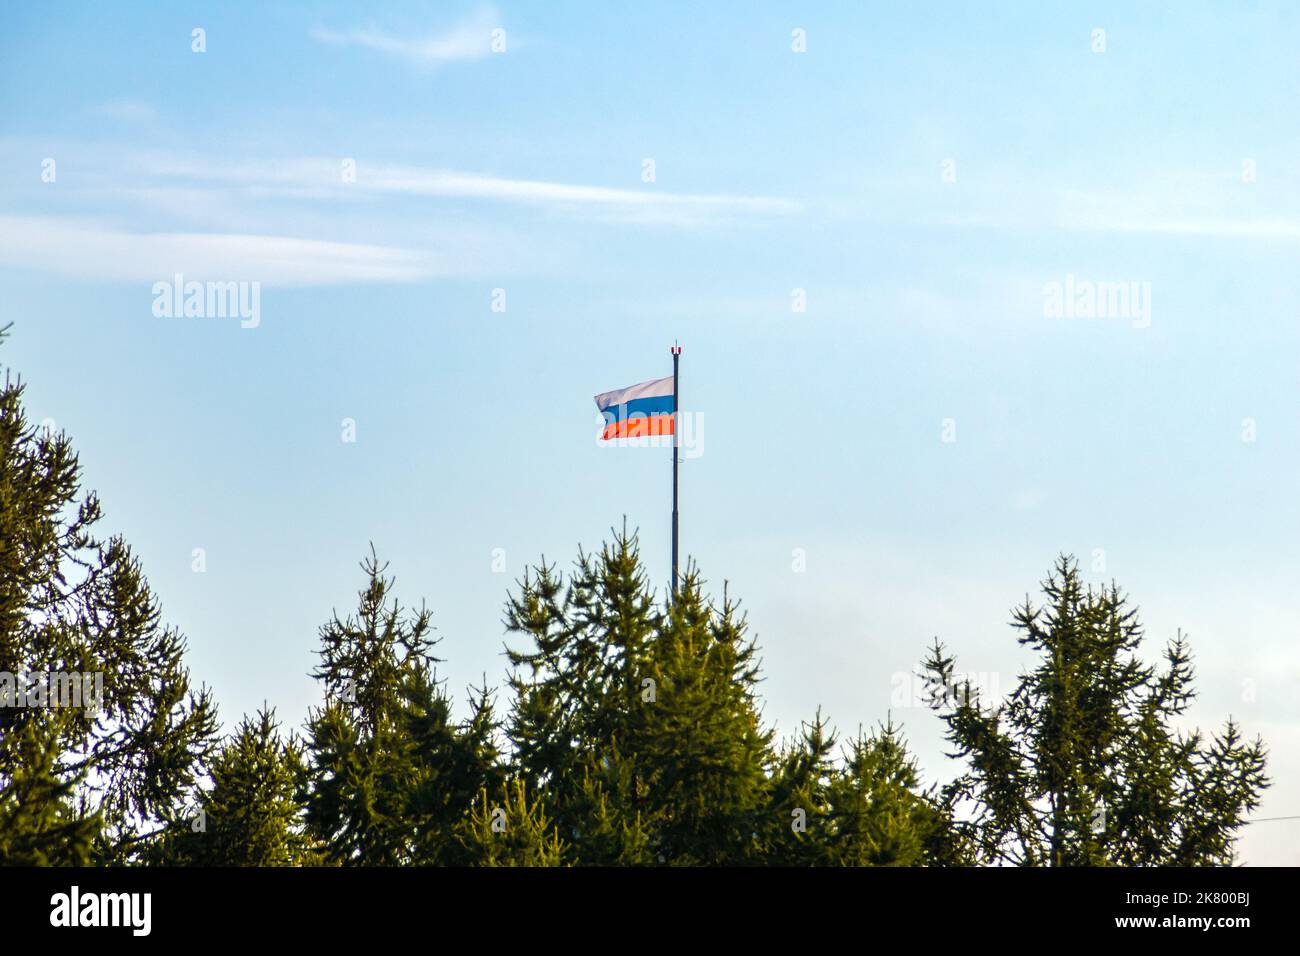 the Russian flag is visible above the coniferous forest on a flagpole with a warning red signal lamp, selective focus Stock Photo